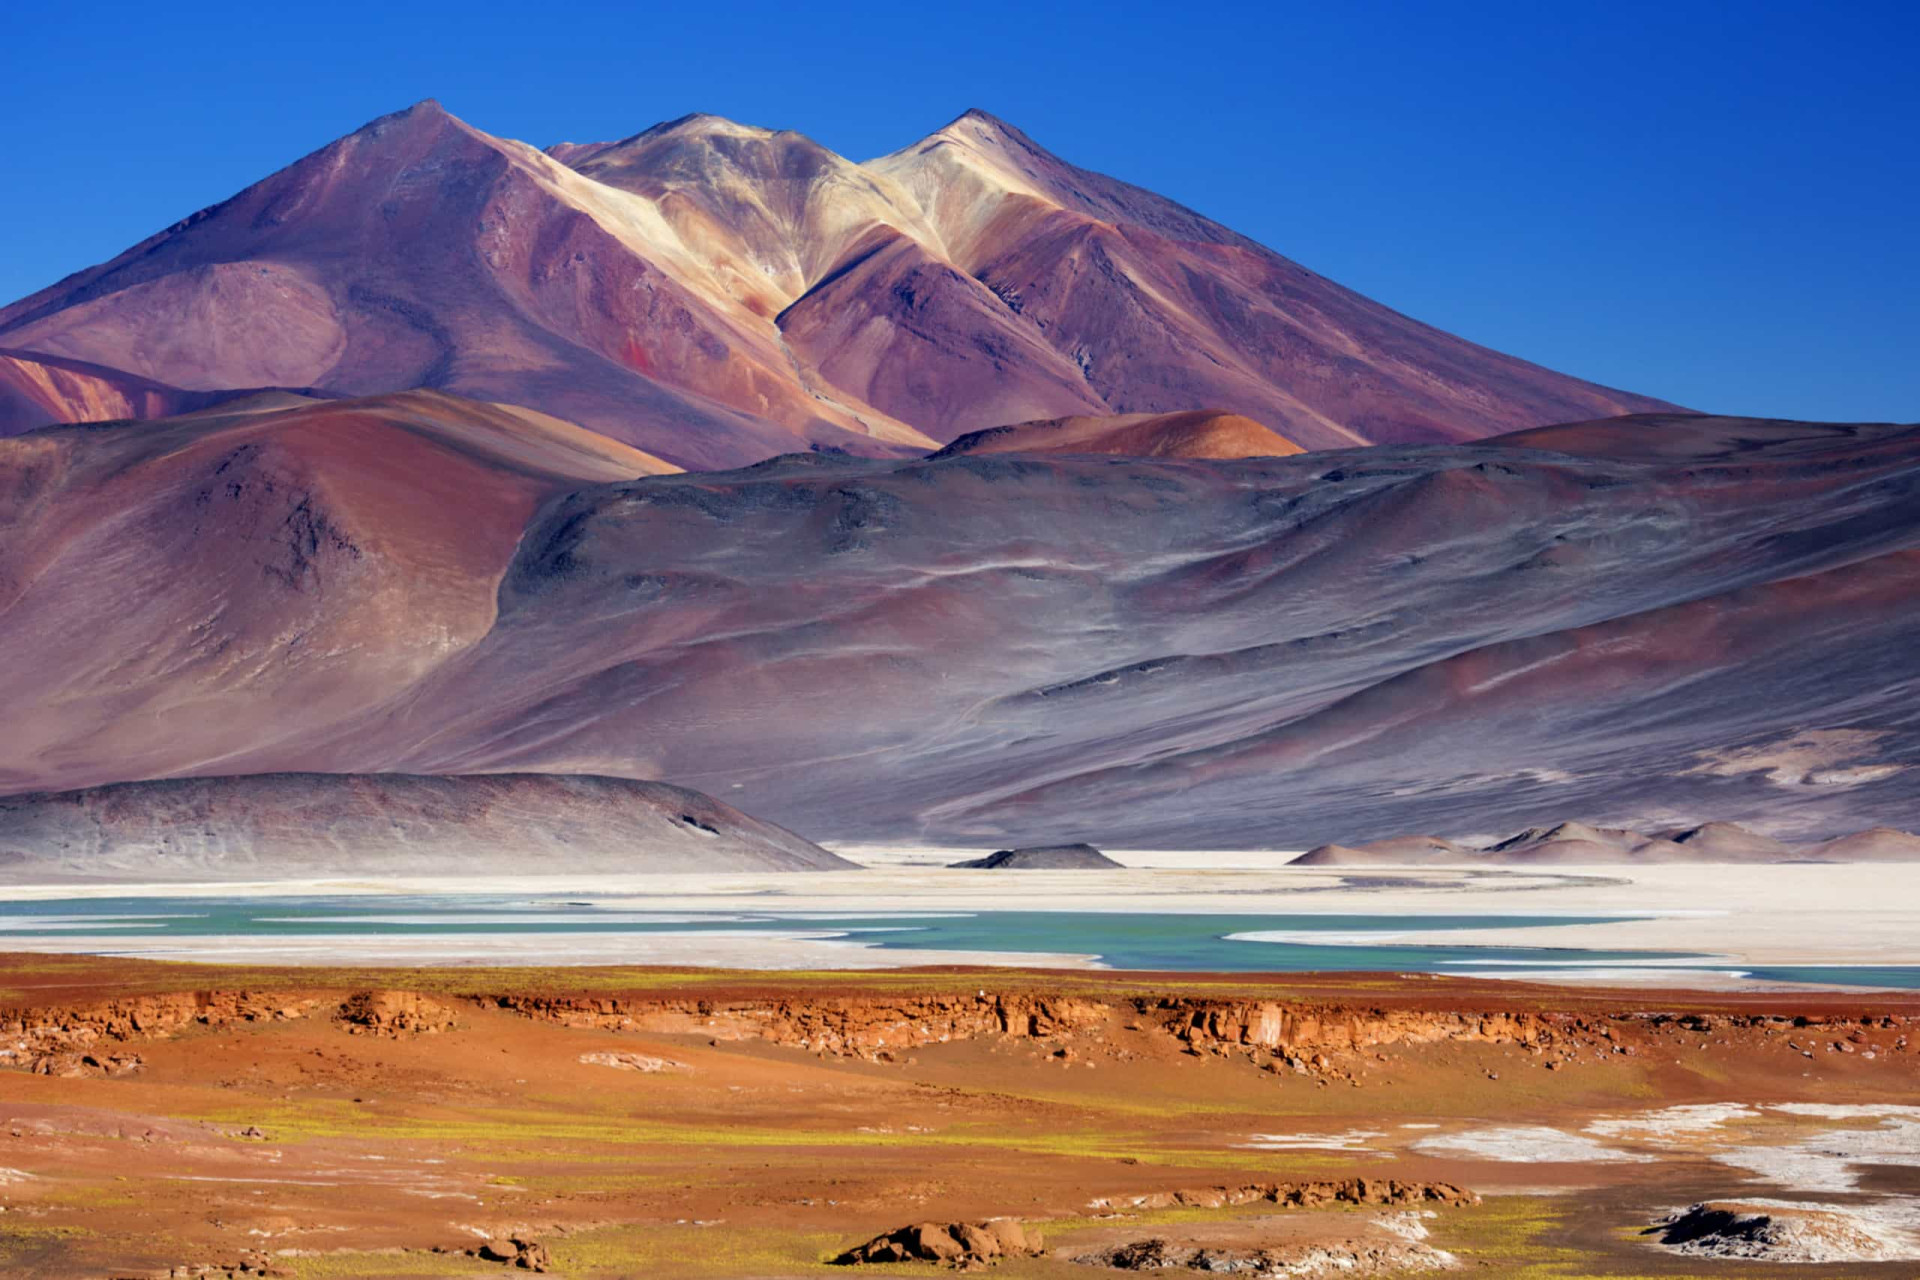 If you want to work up a thirst, take a stroll through the Atacama Desert. This arid, unworldly environment is one of the driest places on the planet.